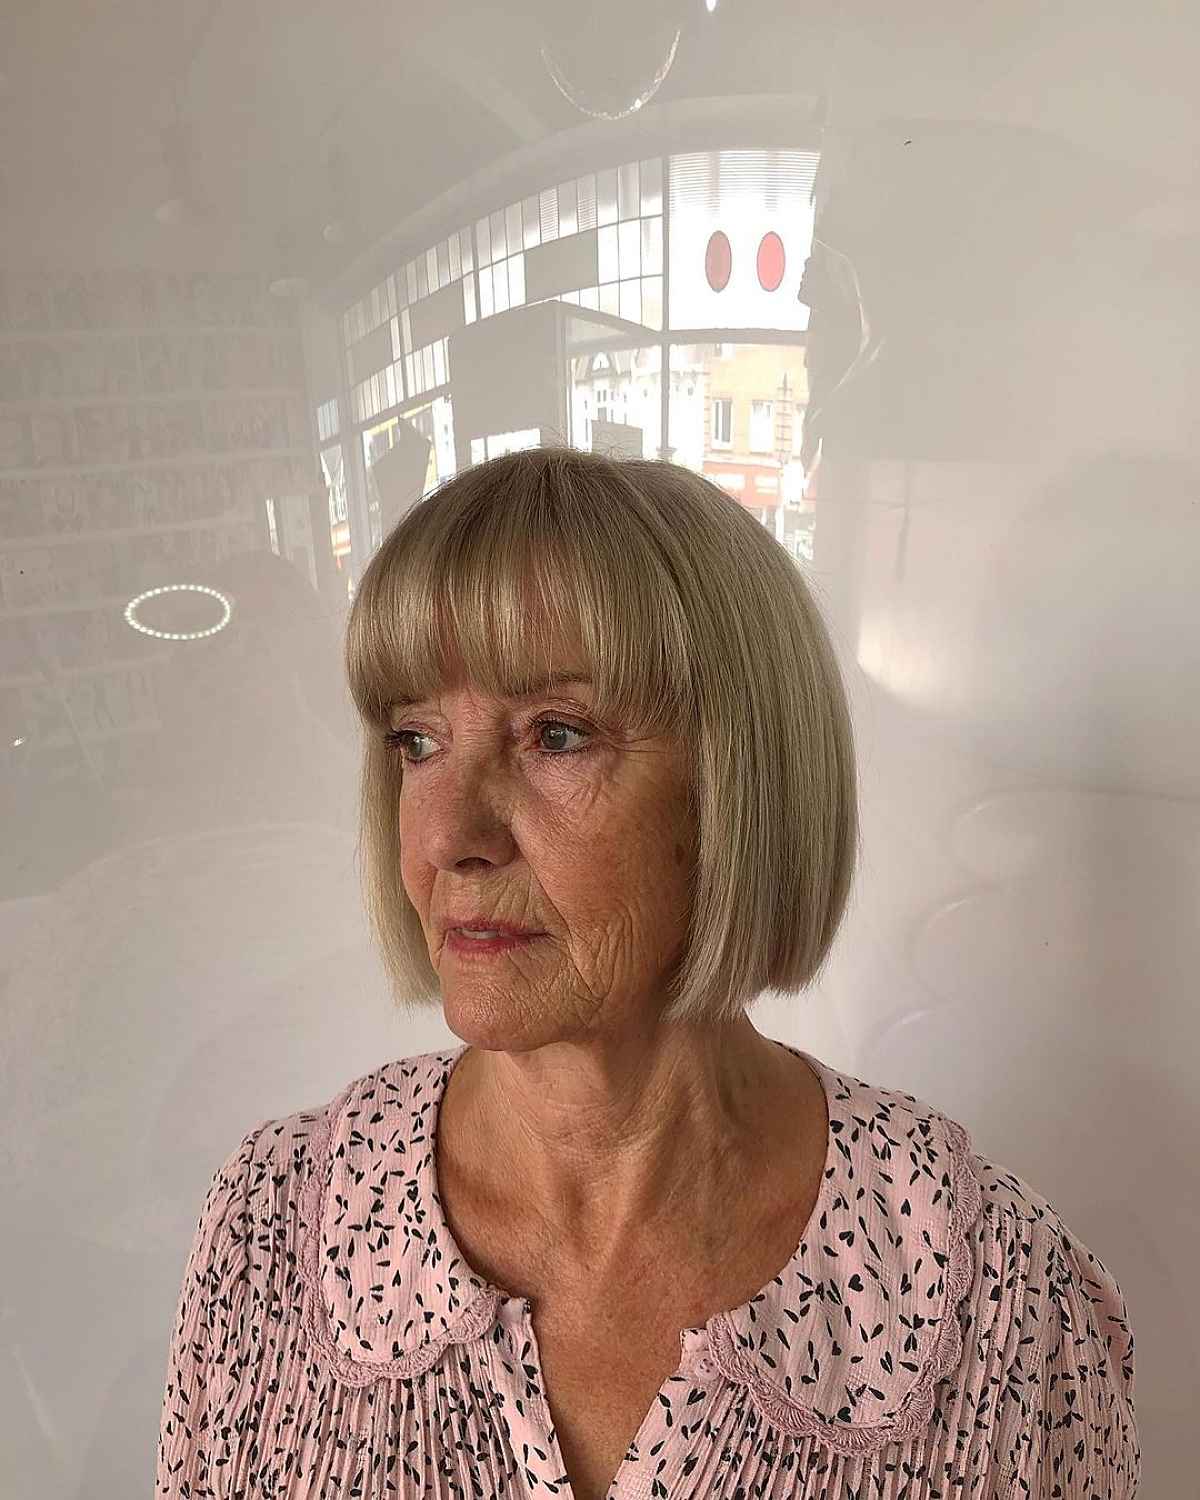 Classic Bob with Bangs for Women Passed Their 60s